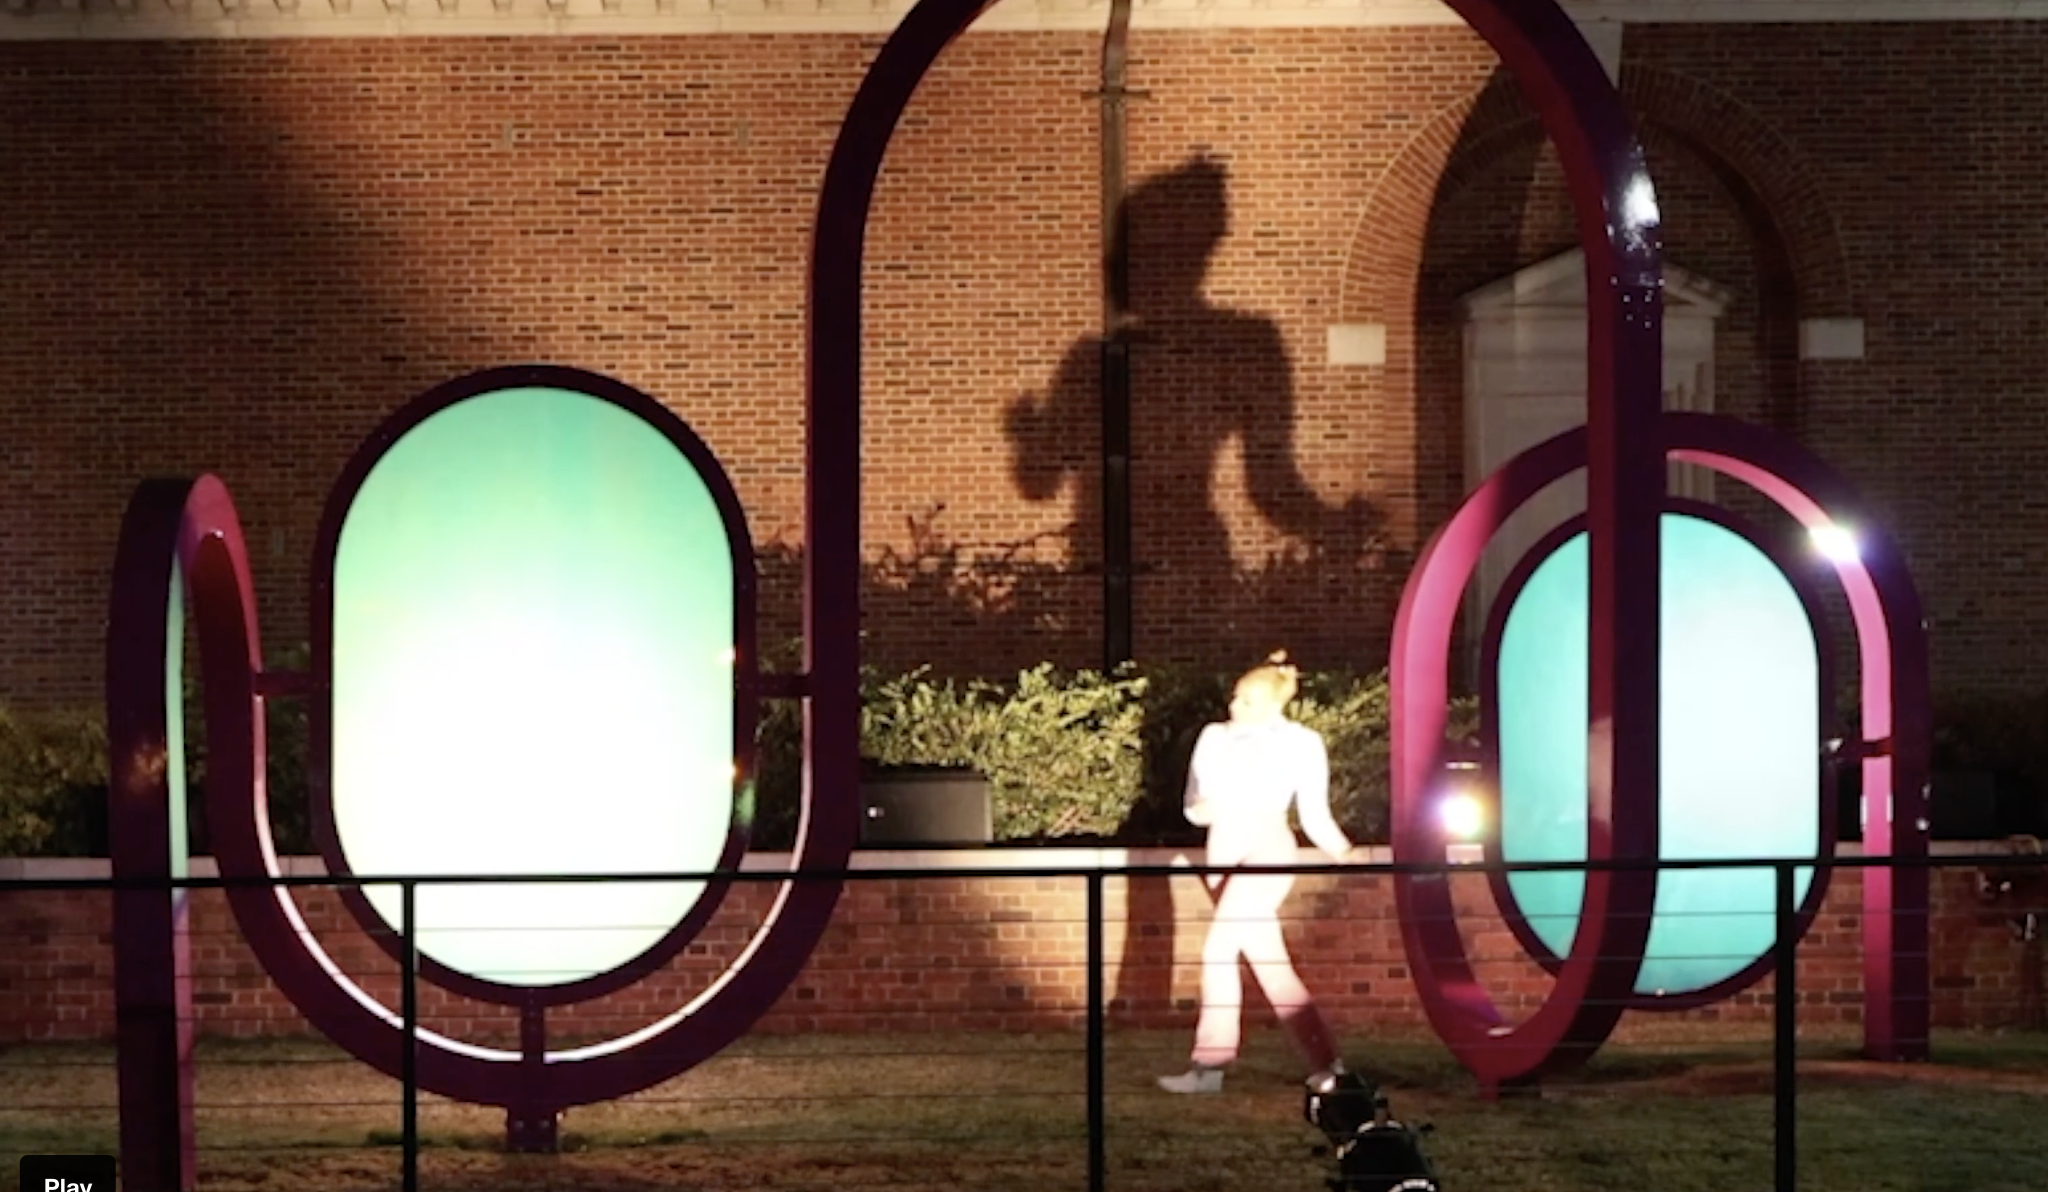 A dancer performs in front of a light outside at night, casting her shadow on a brick wall